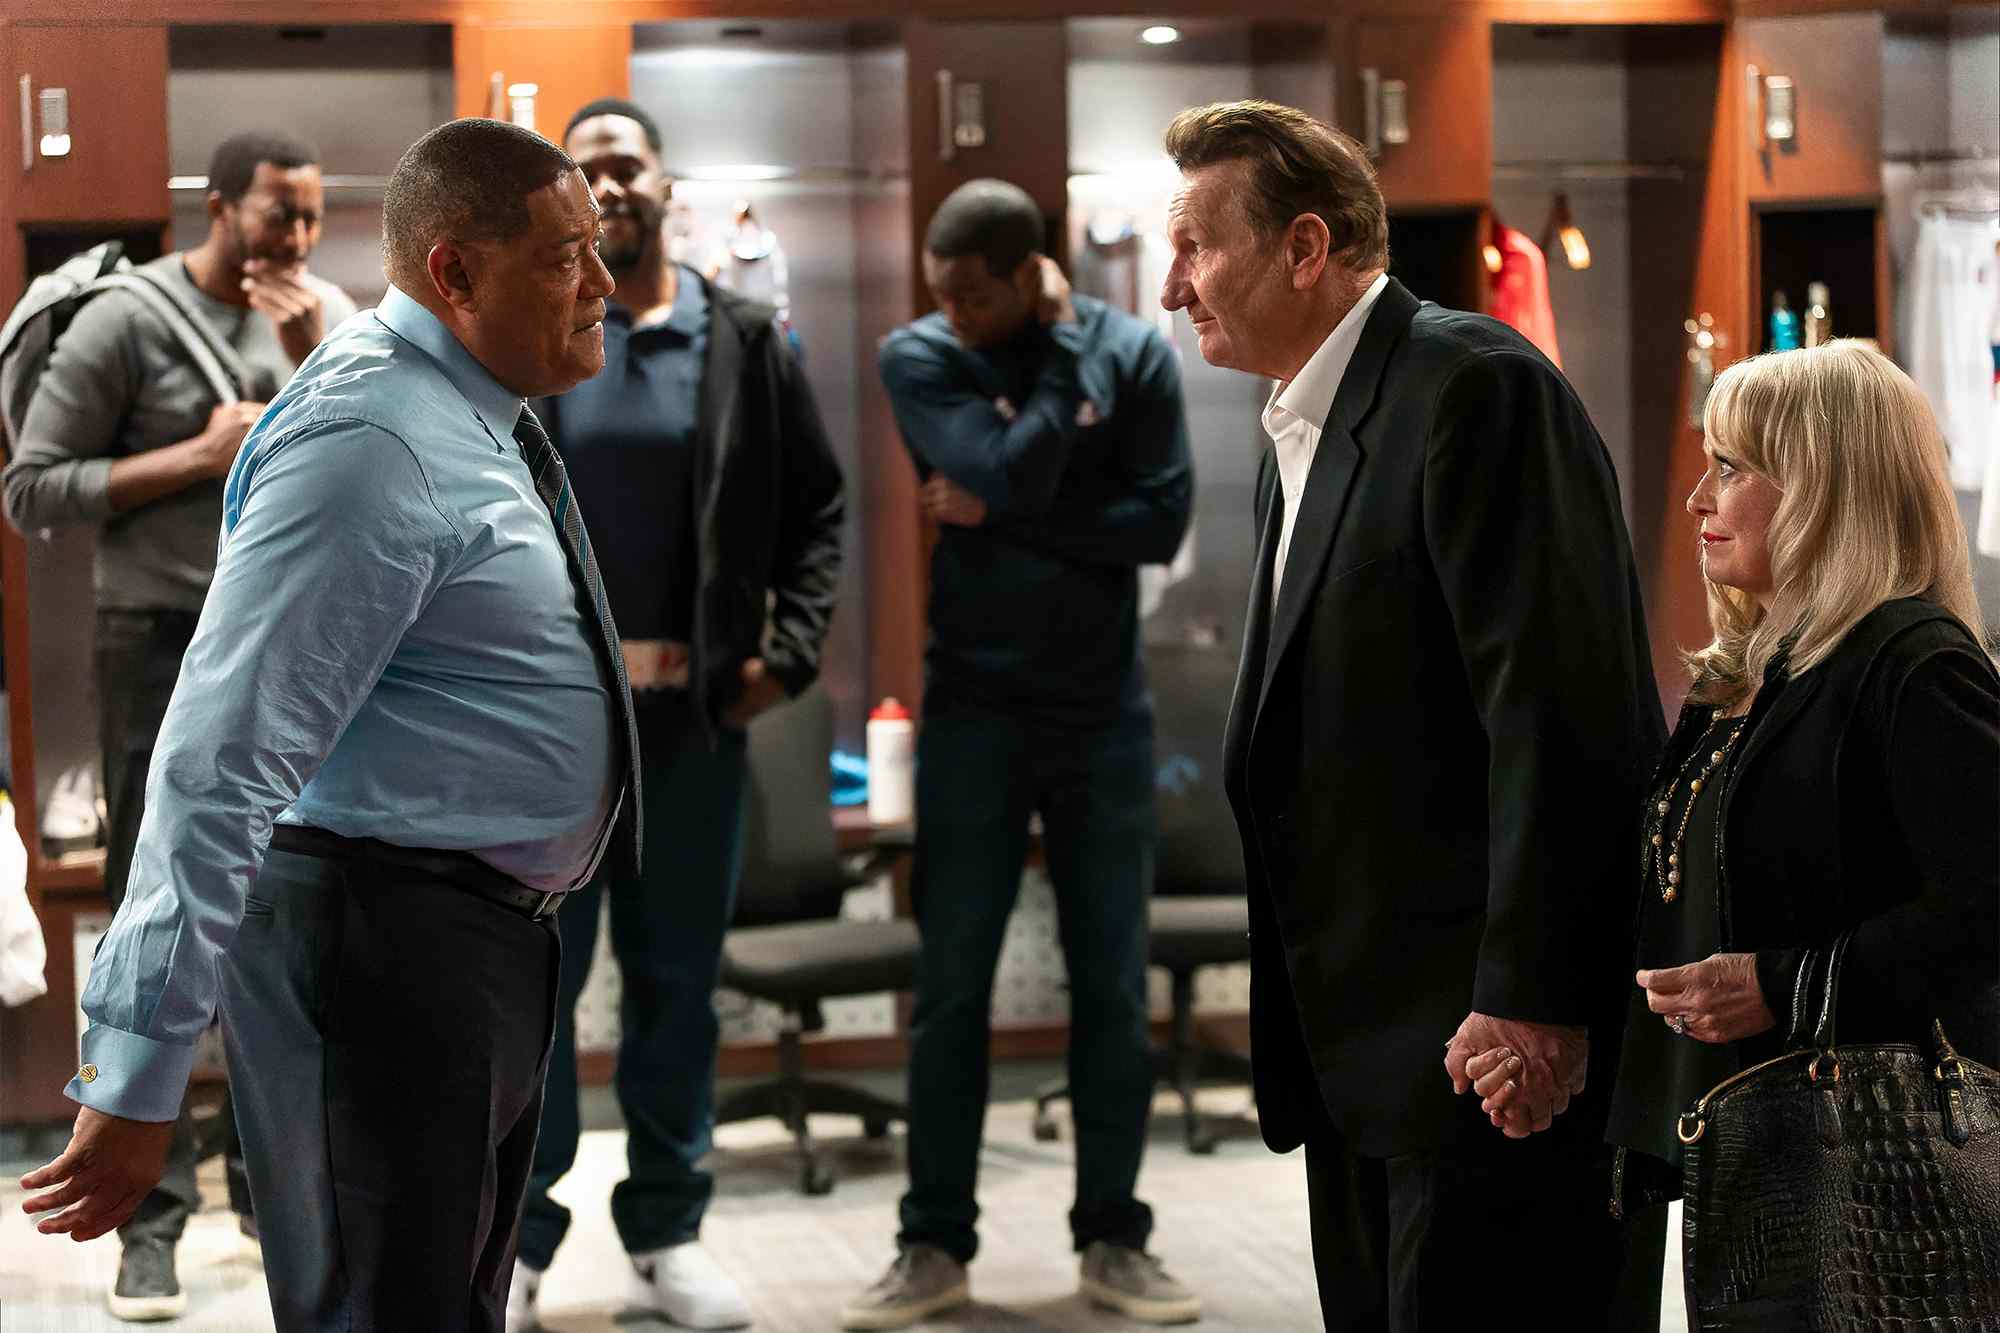 “Clipped” review: Ed O'Neill and Laurence Fishburne drive this slick b-ball drama